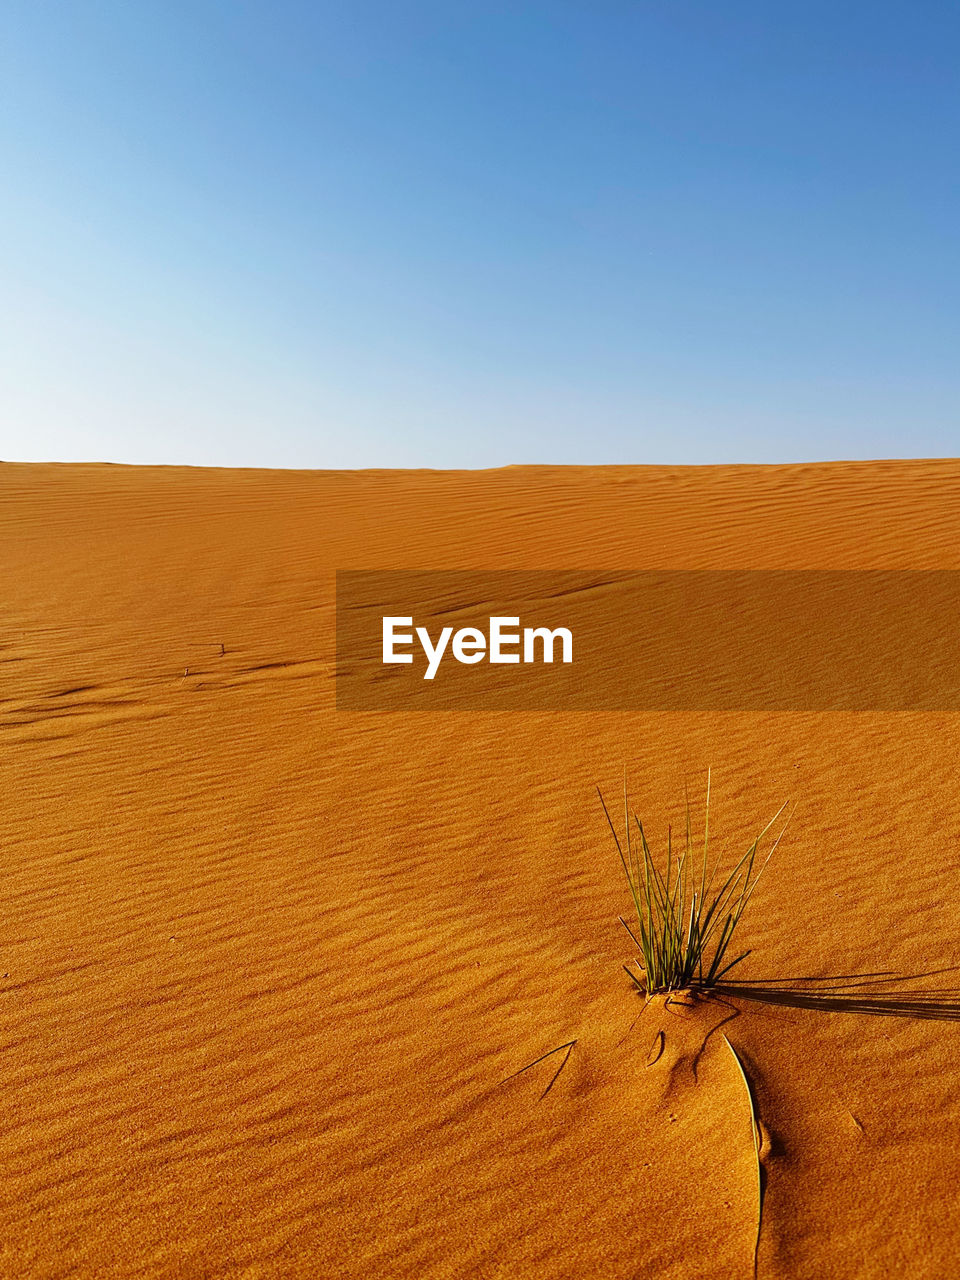 land, landscape, environment, erg, desert, sand, sand dune, sky, climate, scenics - nature, nature, grassland, arid climate, clear sky, beauty in nature, dry, plant, natural environment, no people, blue, sunlight, horizon over land, drought, day, tranquility, horizon, sunny, outdoors, soil, non-urban scene, travel, animal wildlife, accidents and disasters, plain, tranquil scene, travel destinations, semi-arid, copy space, prairie, singing sand, remote, heat, extreme terrain, hill, tourism, dune, barren, loneliness, urban skyline, animal, orange color, safari